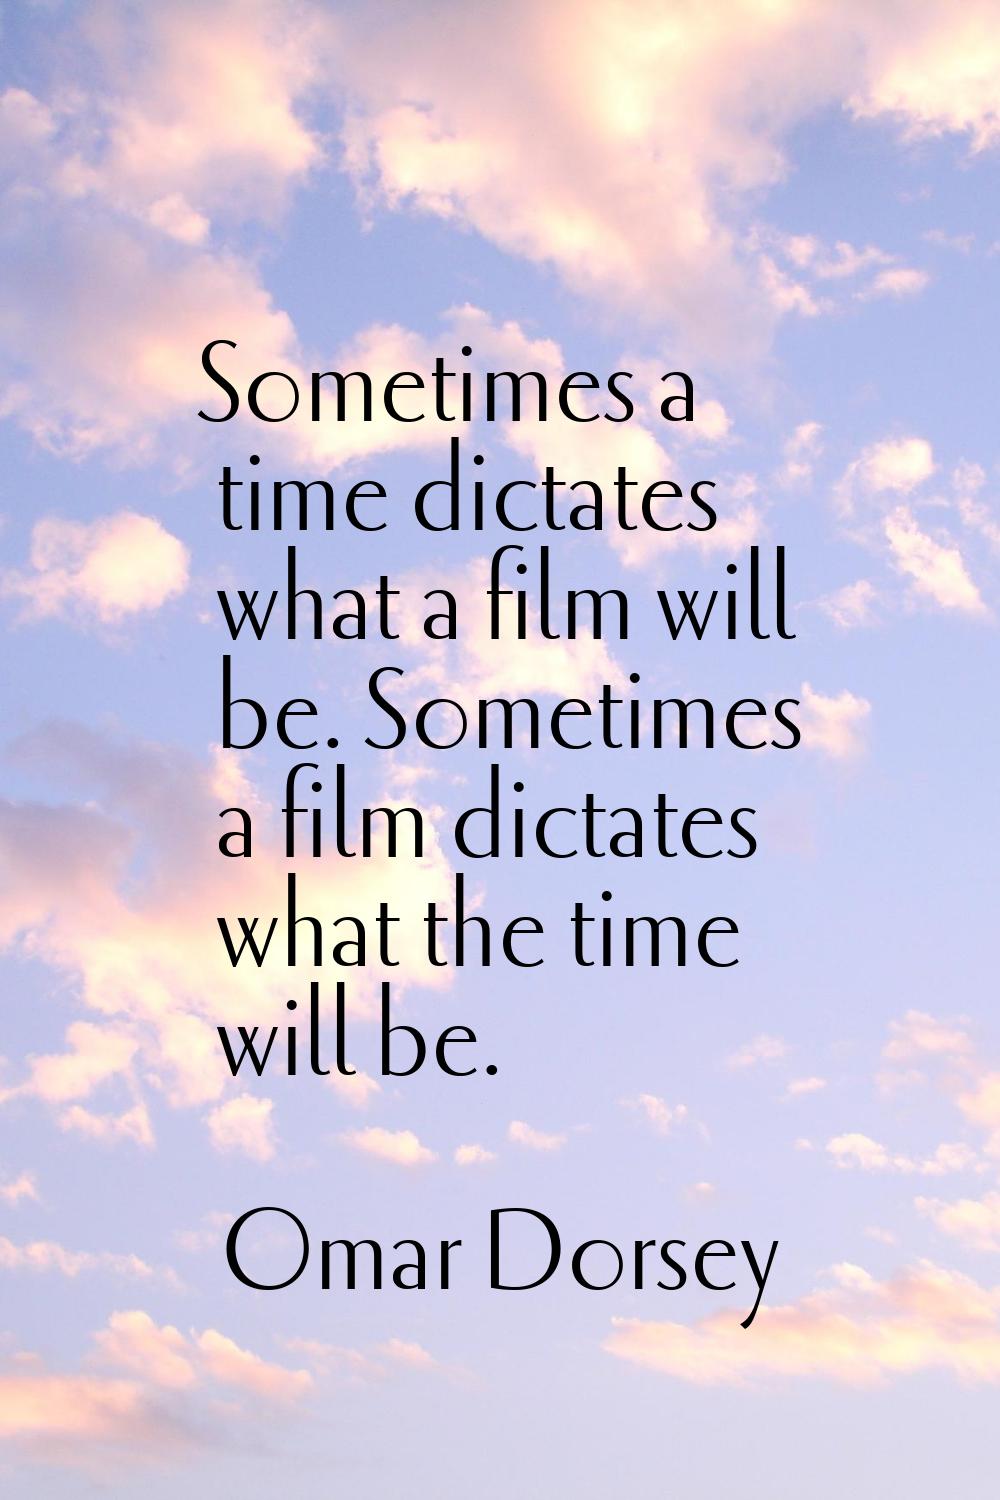 Sometimes a time dictates what a film will be. Sometimes a film dictates what the time will be.